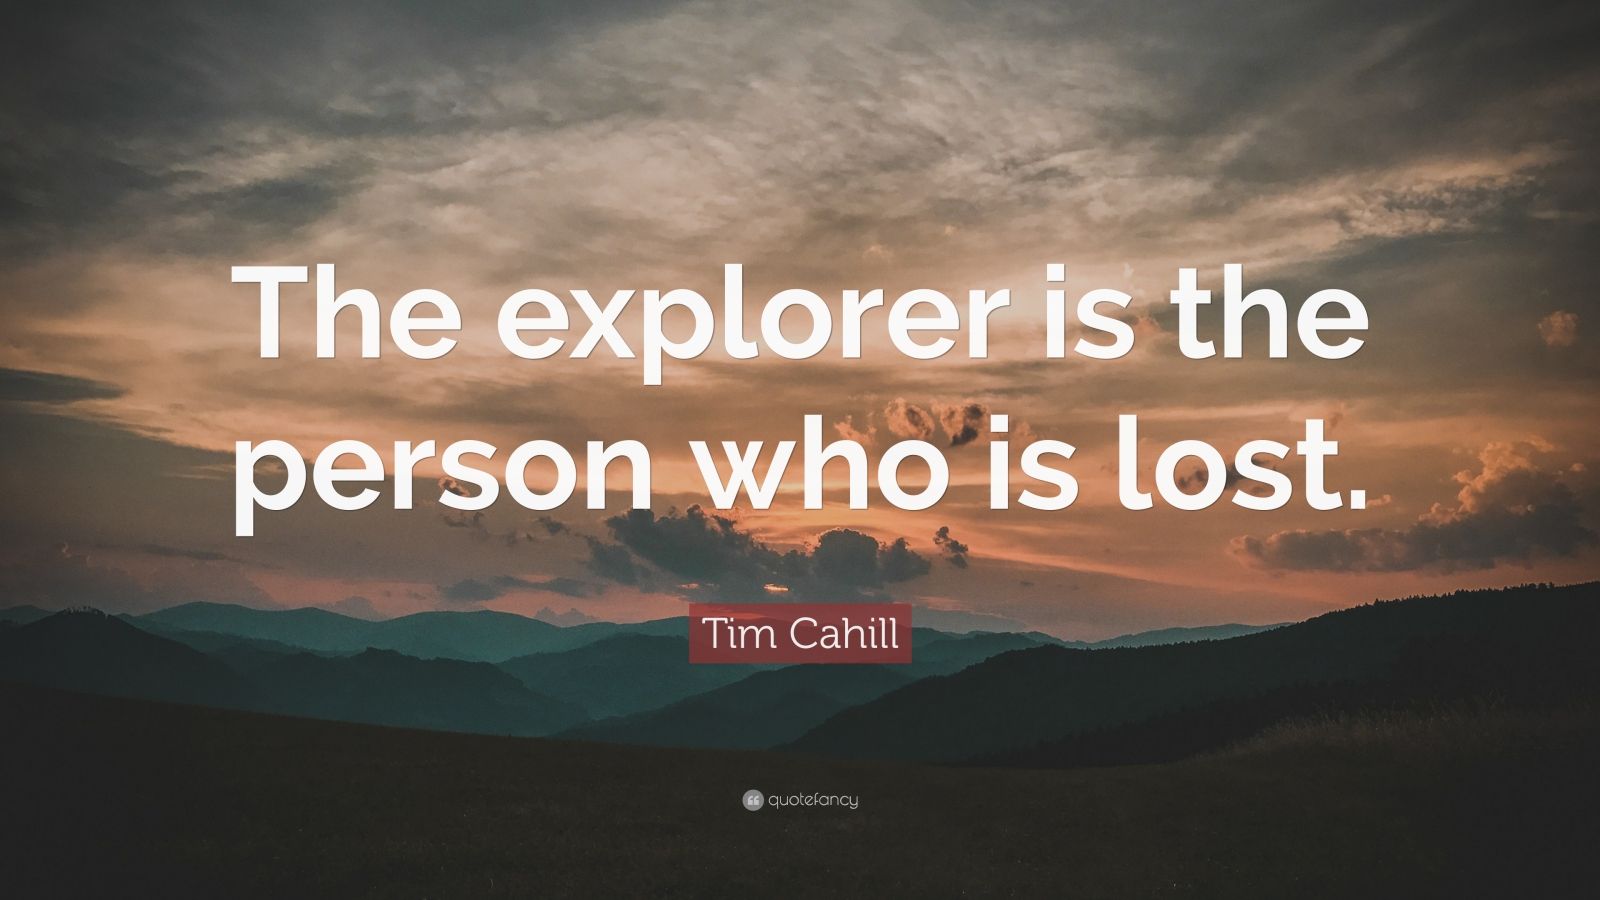 Tim Cahill Quote “The explorer is the person who is lost.” (9